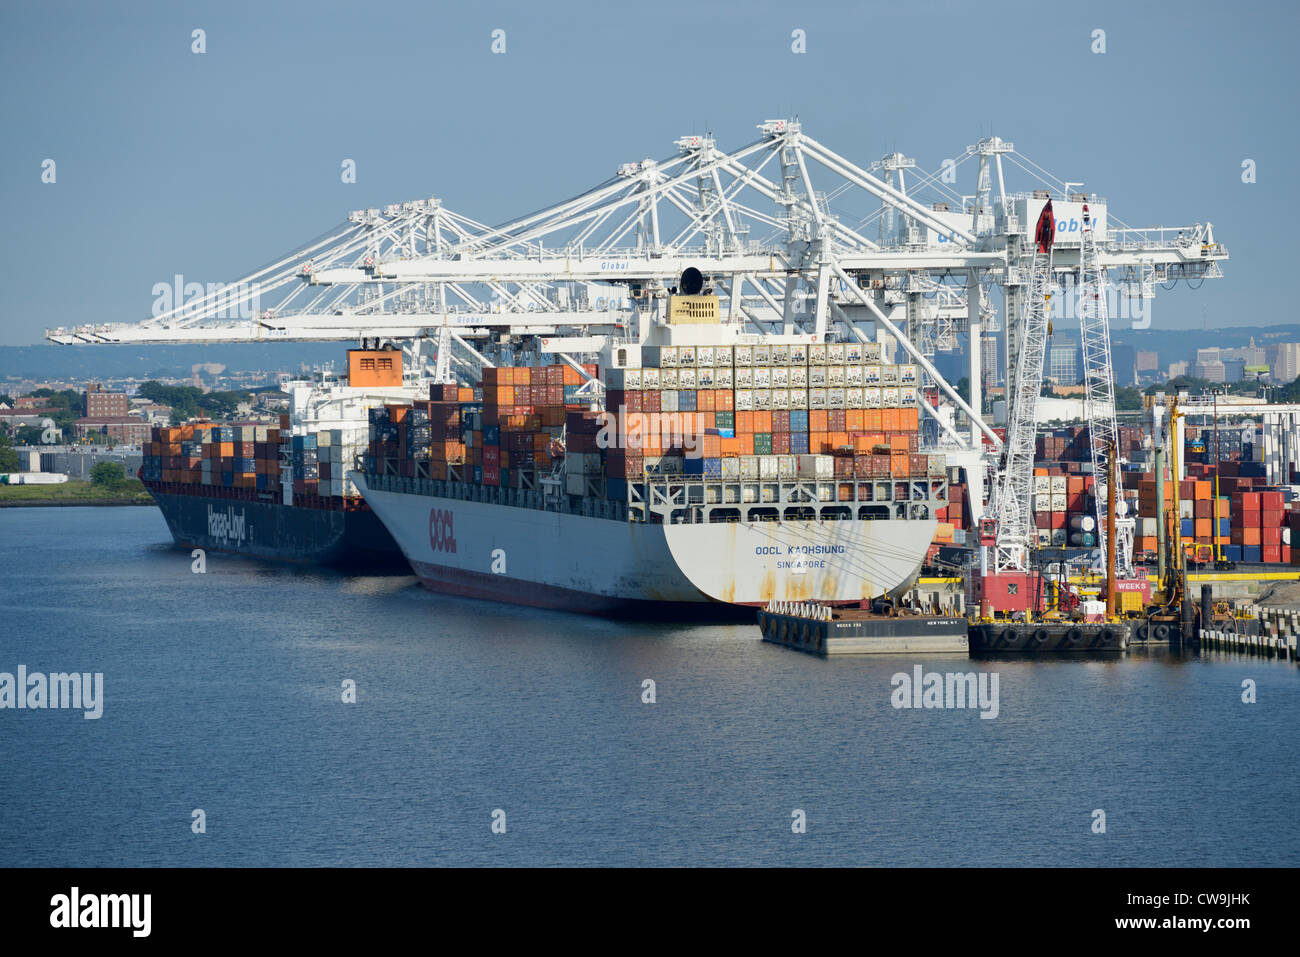 Le navi portacontainer, Bayonne, New Jersey Foto Stock